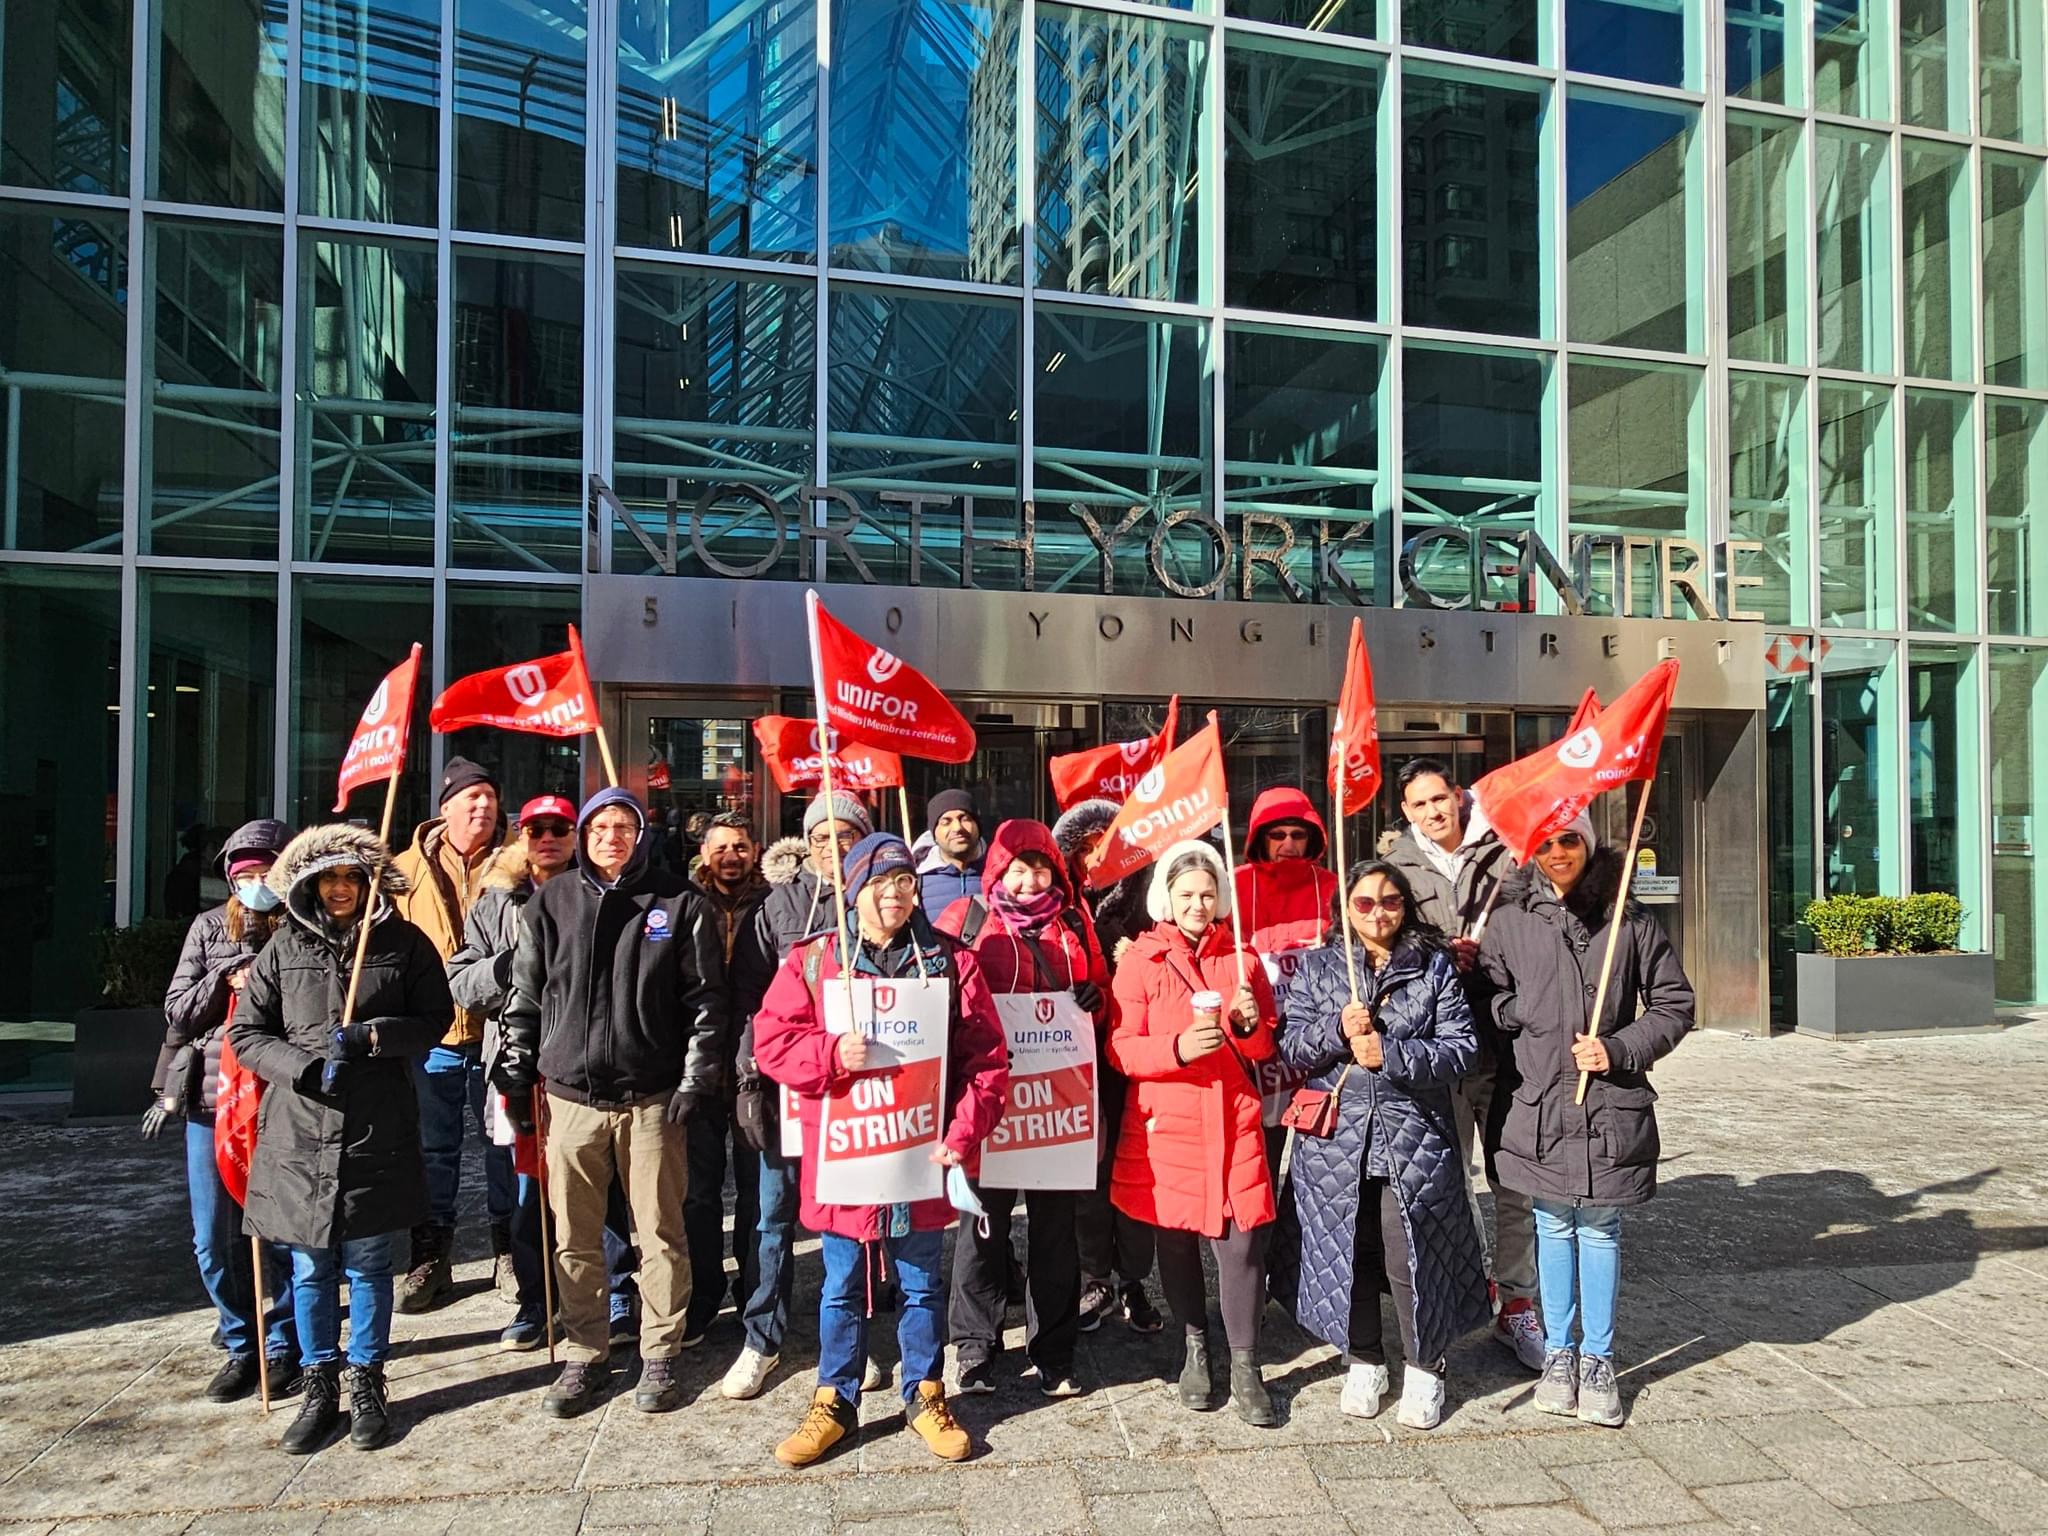 A group of people standing outside an office tower with red Unifor flags.